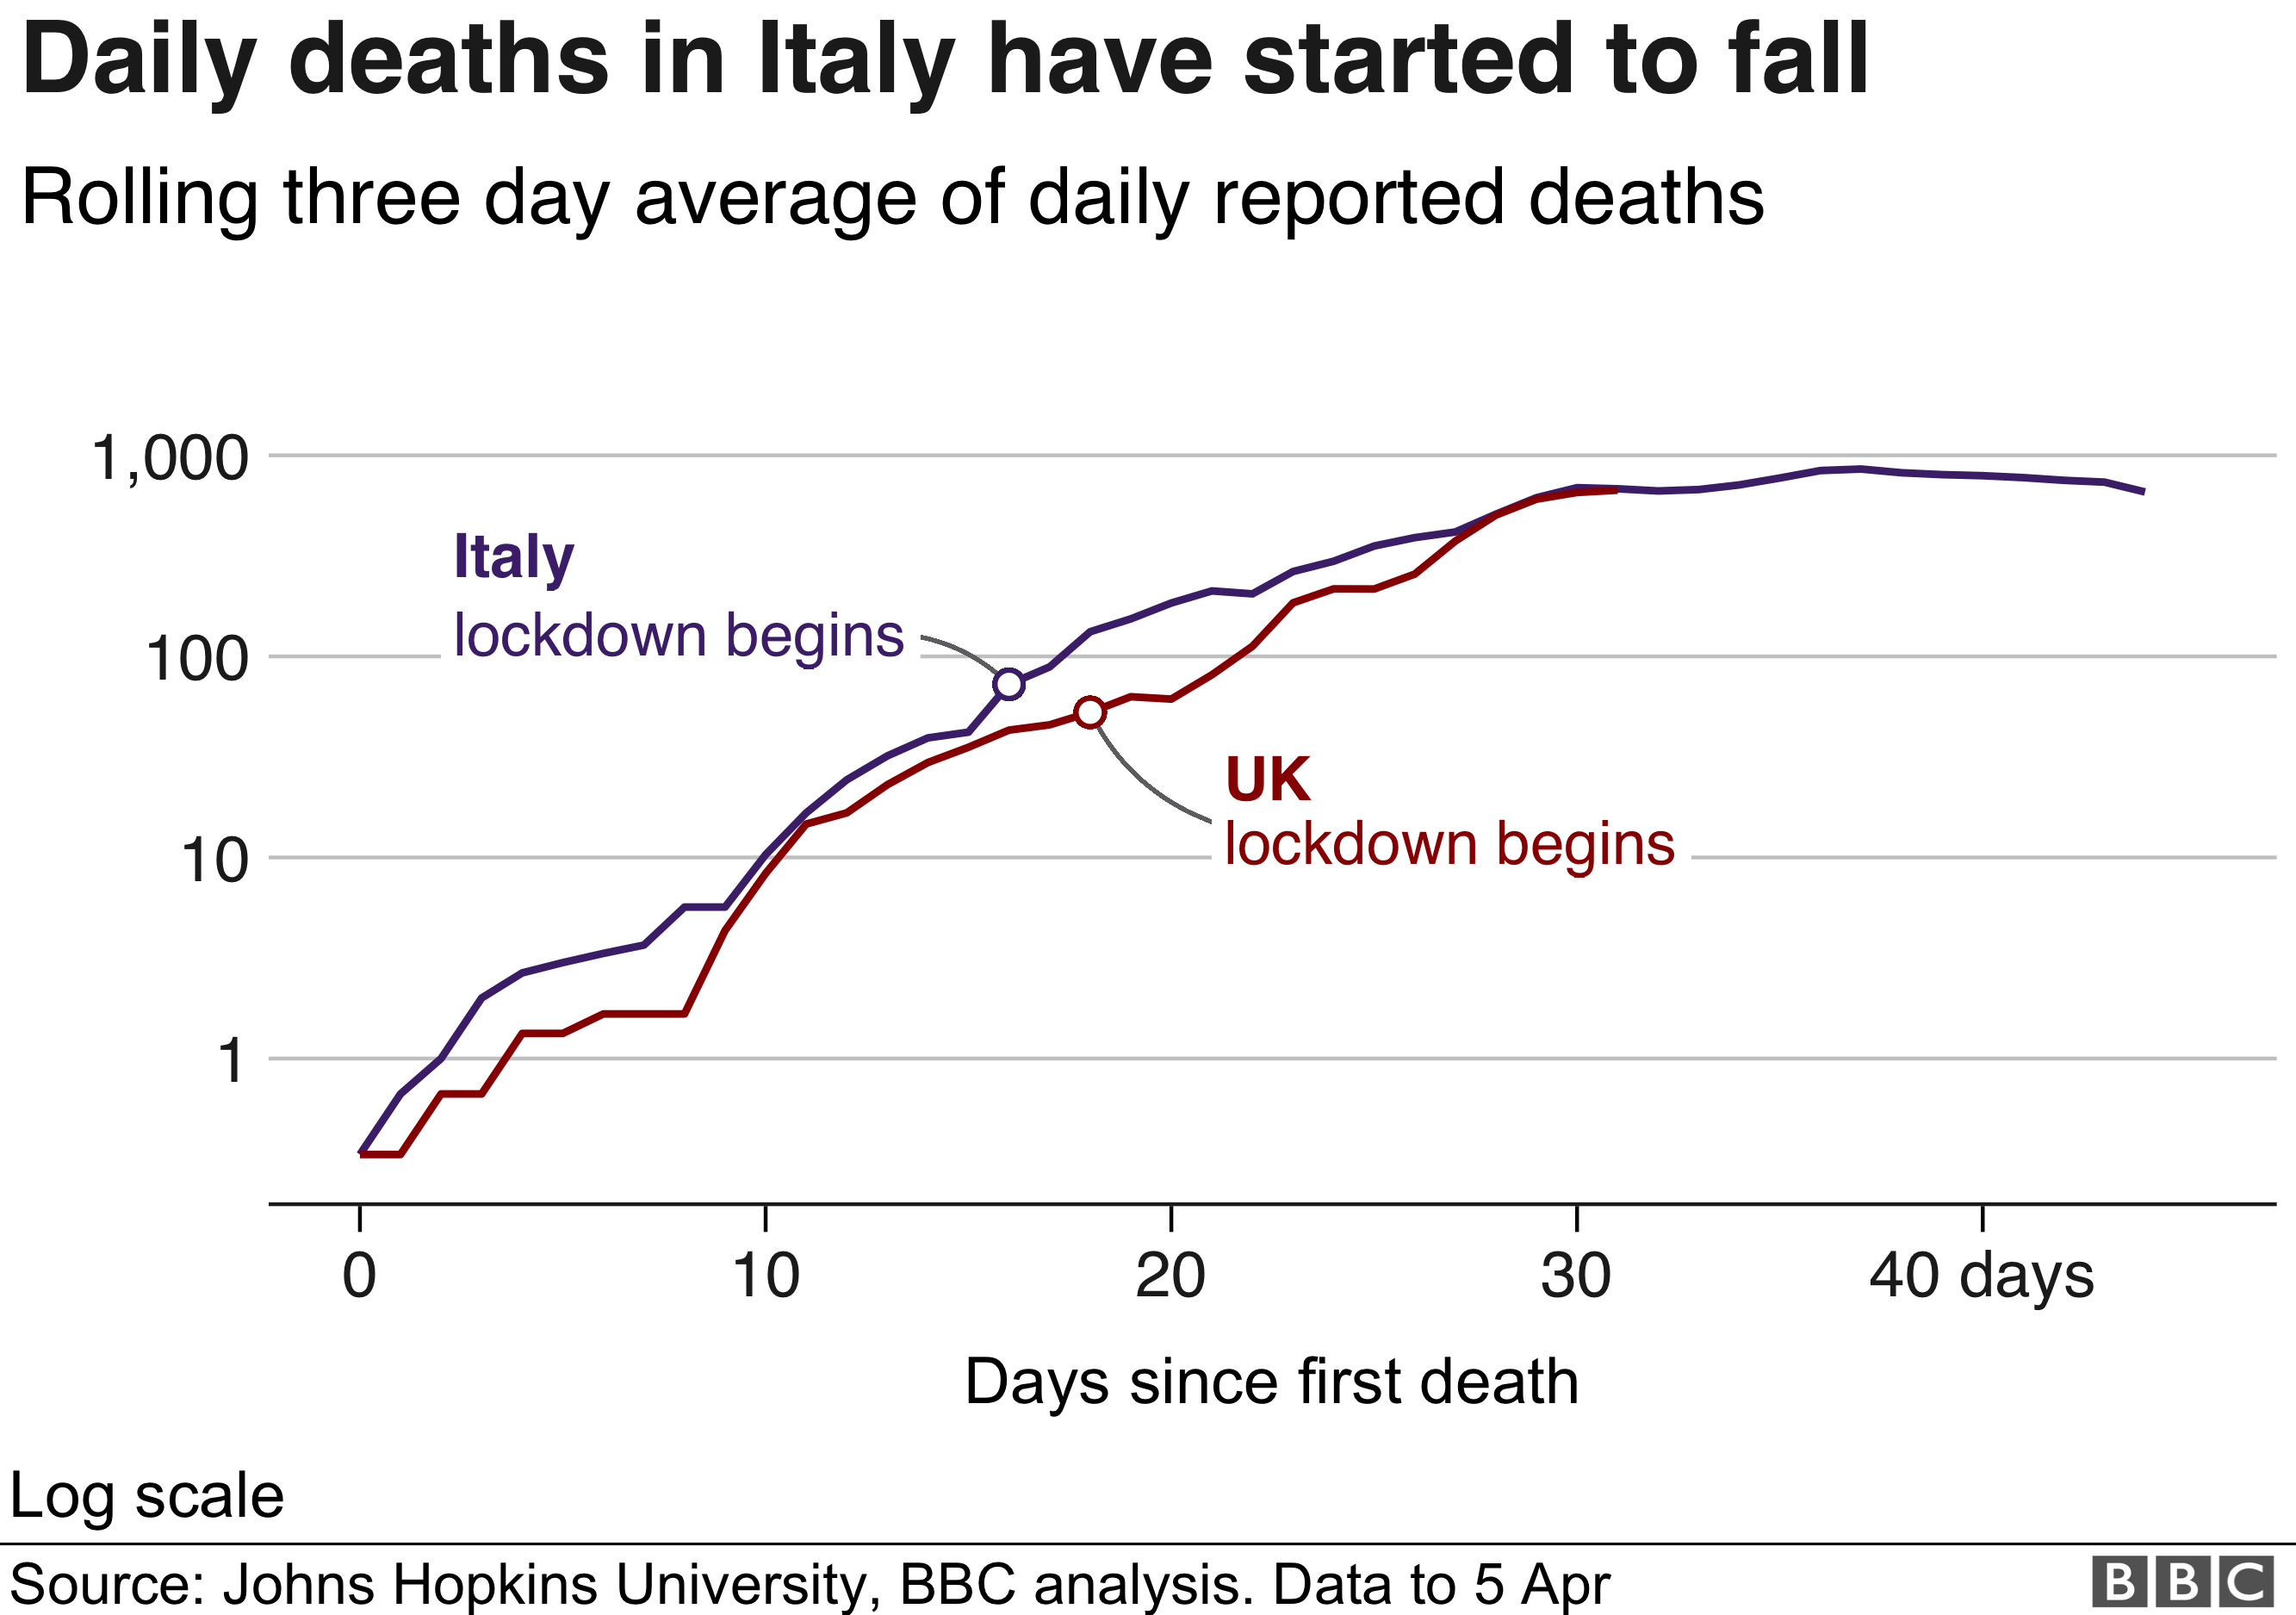 Comparison of UK and Italy's daily death data